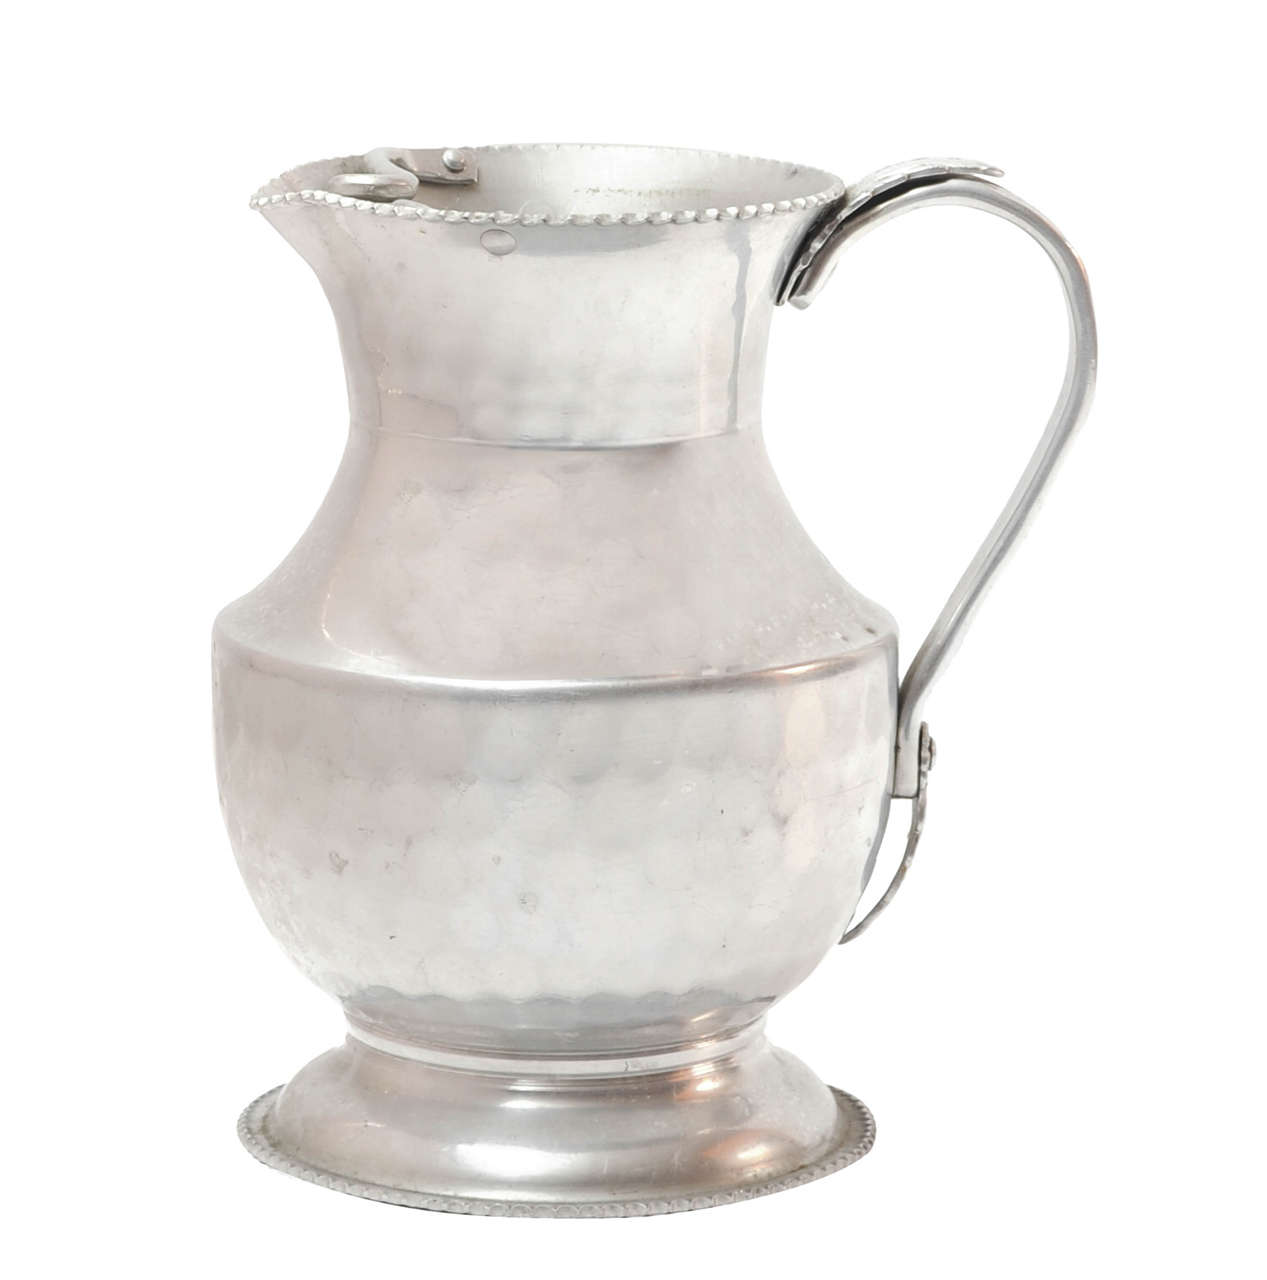 Cromwell hand-hammered pitcher.